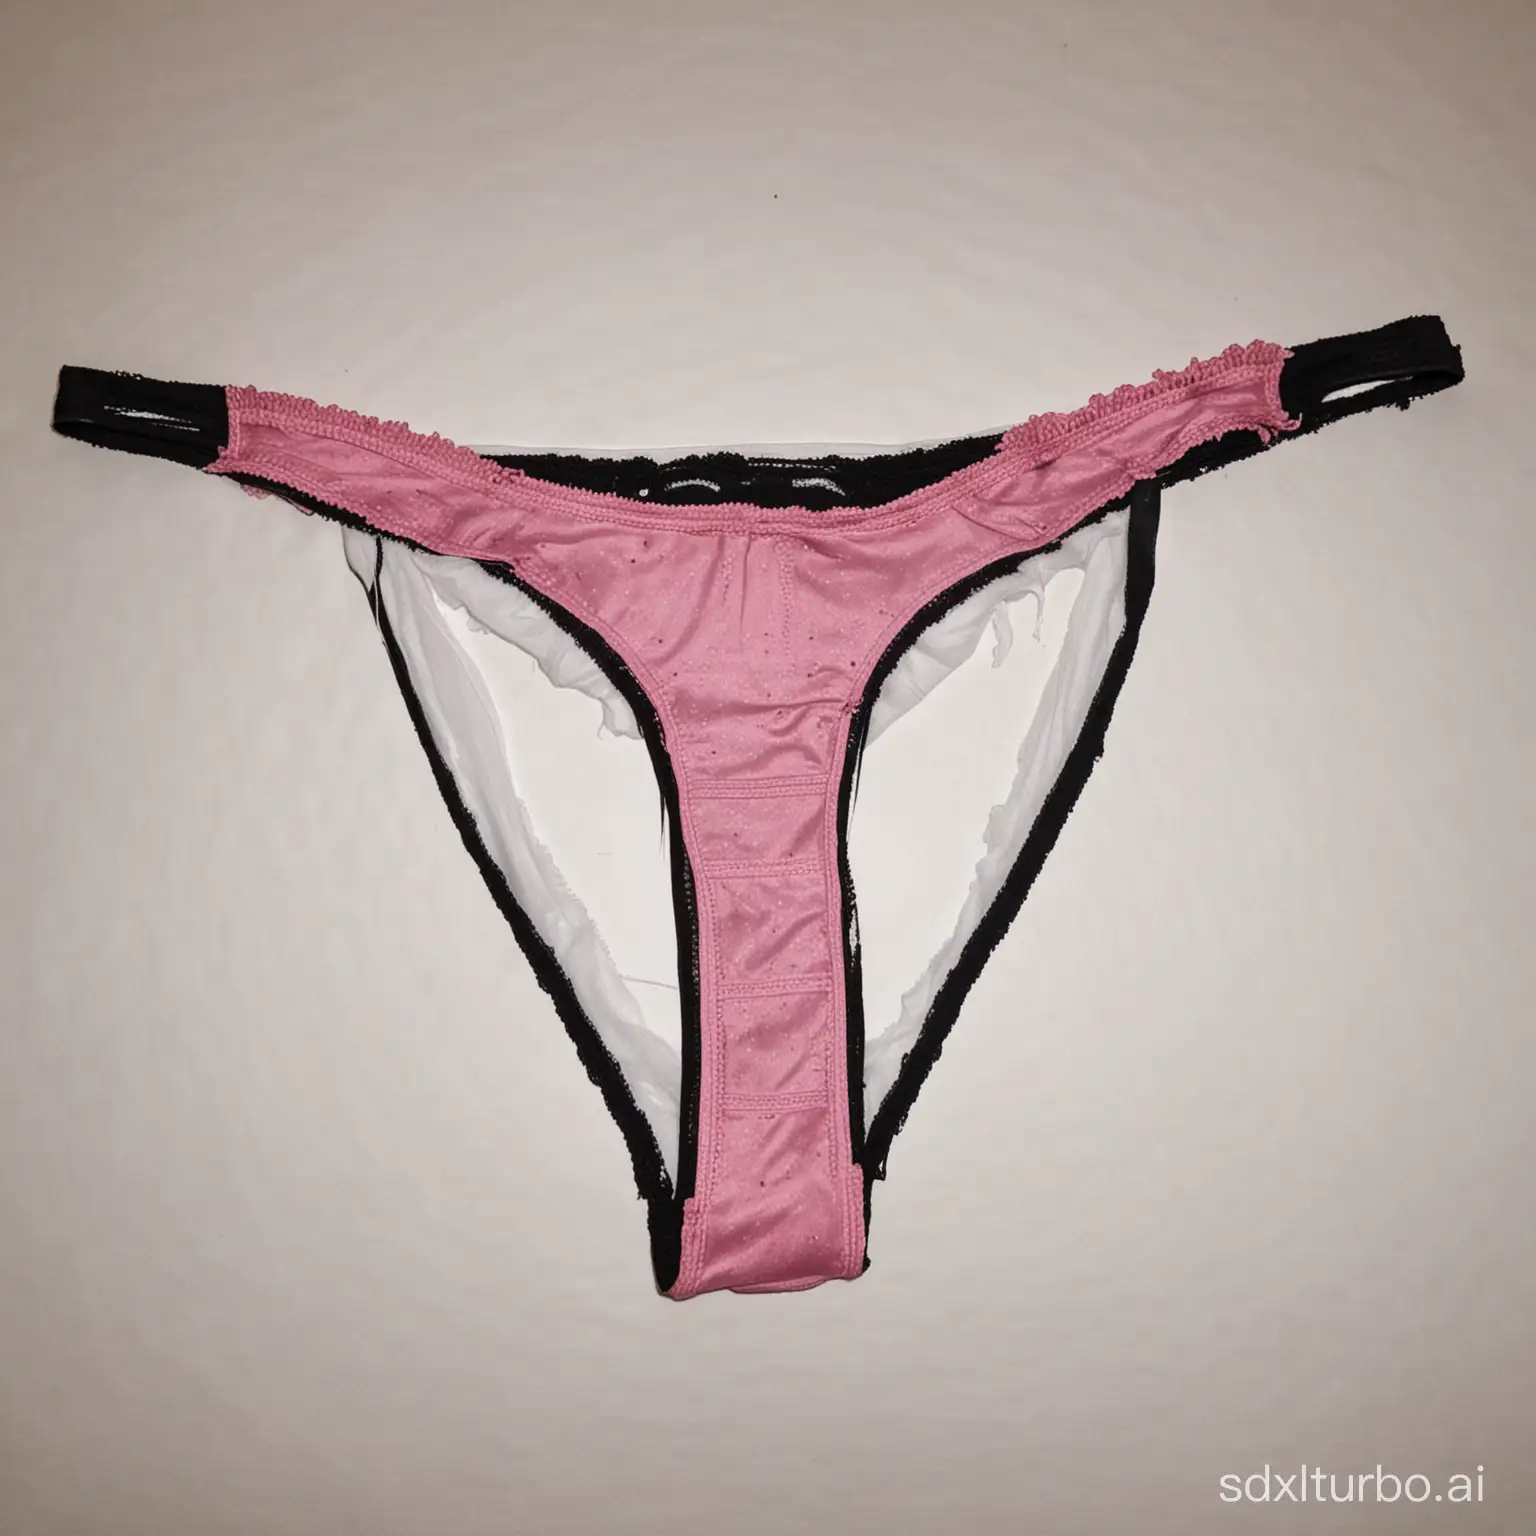 Dirty-Pink-and-Black-Thong-on-Bed-with-Stained-Cotton-Liner